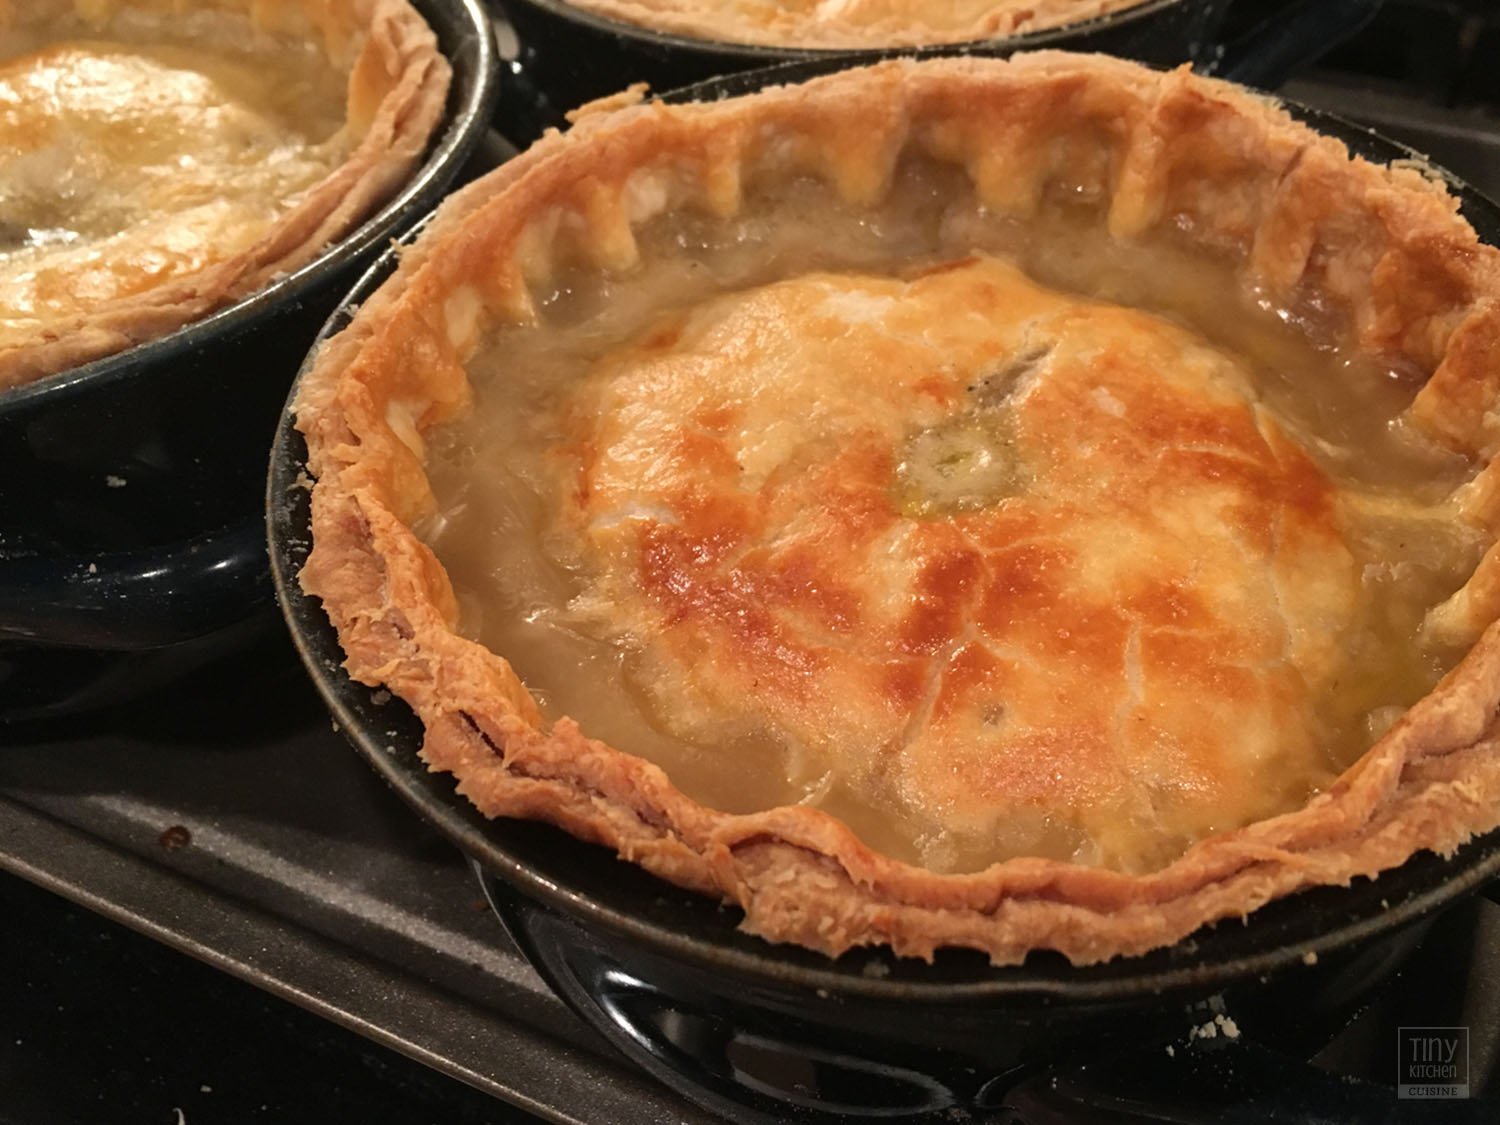 This vegetable pot pie is the ultimate vegetarian comfort food recipe! Enjoy this homemade vegetable stew encased in two layers of crispy, flaky, golden brown all-butter pie crusts. | Tiny Kitchen Cuisine | https://tiny.kitchen